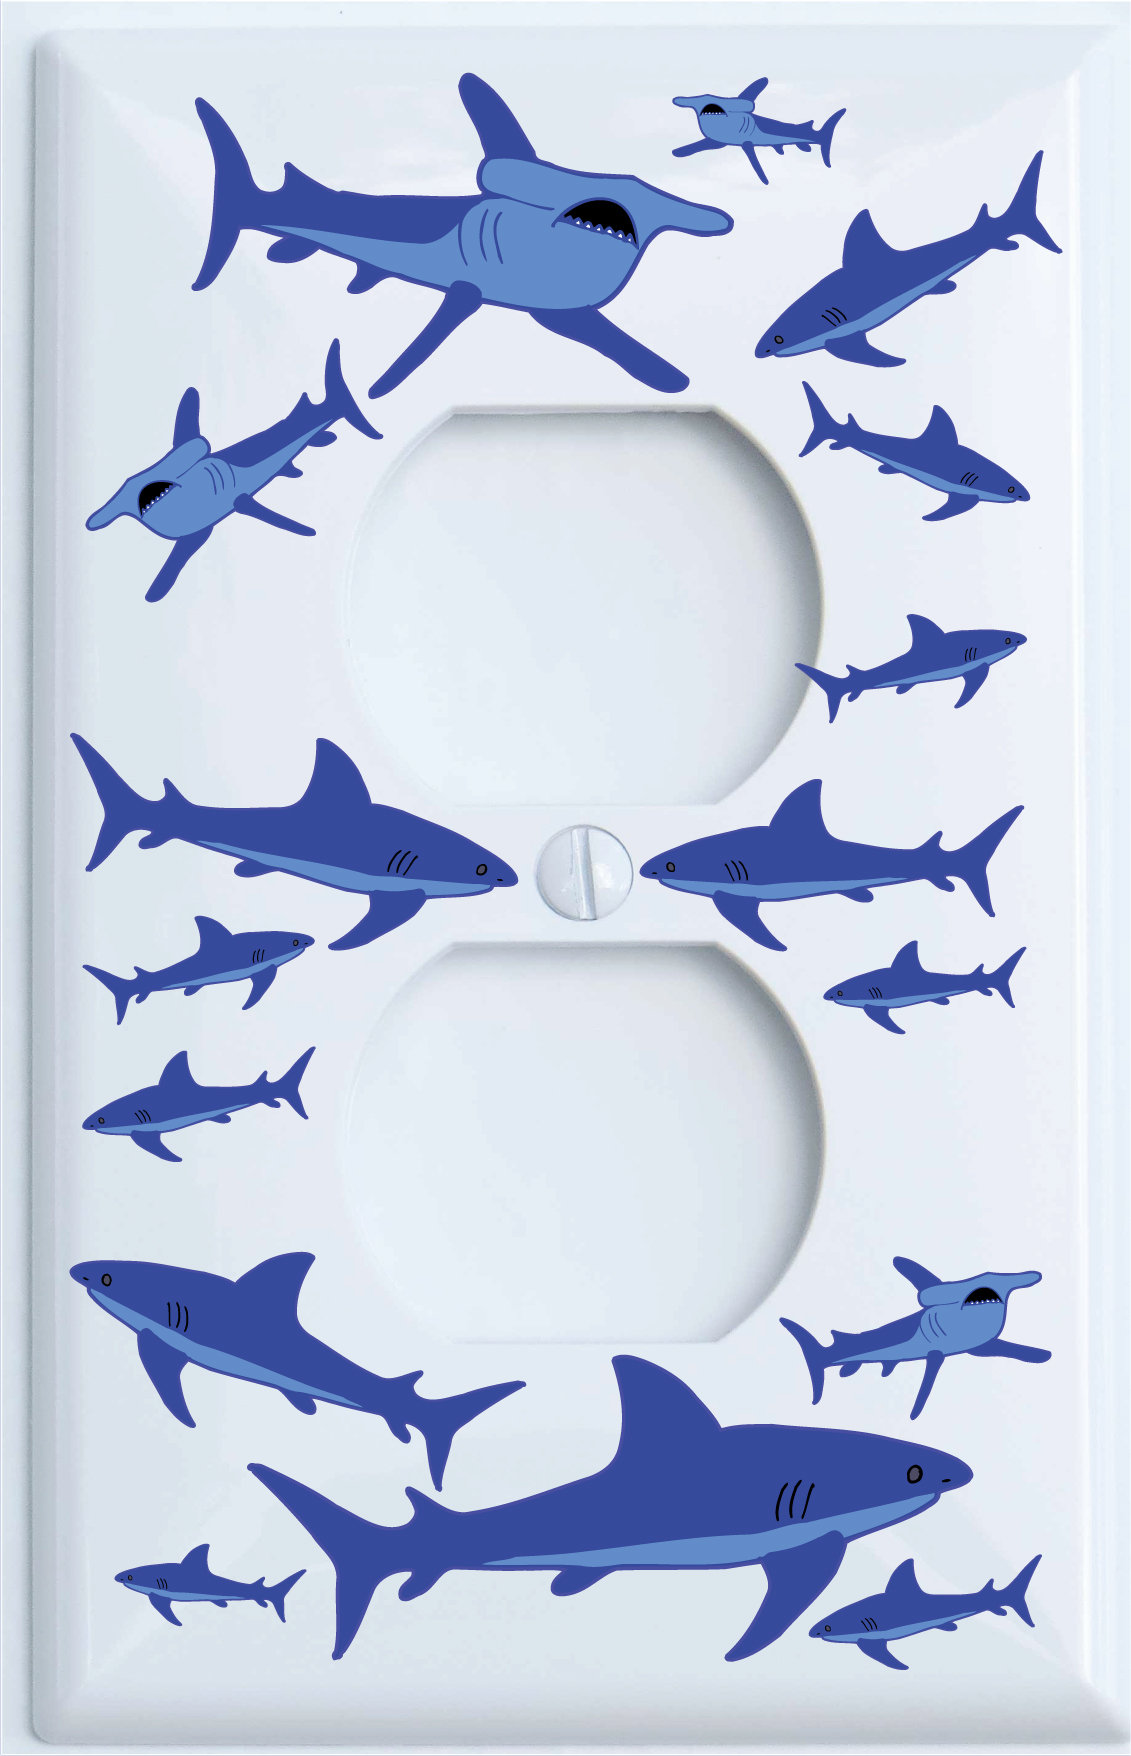 Shark Attack Outlet Switch Plates Covers / Sharks Childrens Nursery Wall Decor (Outlet / GFCI Cover)